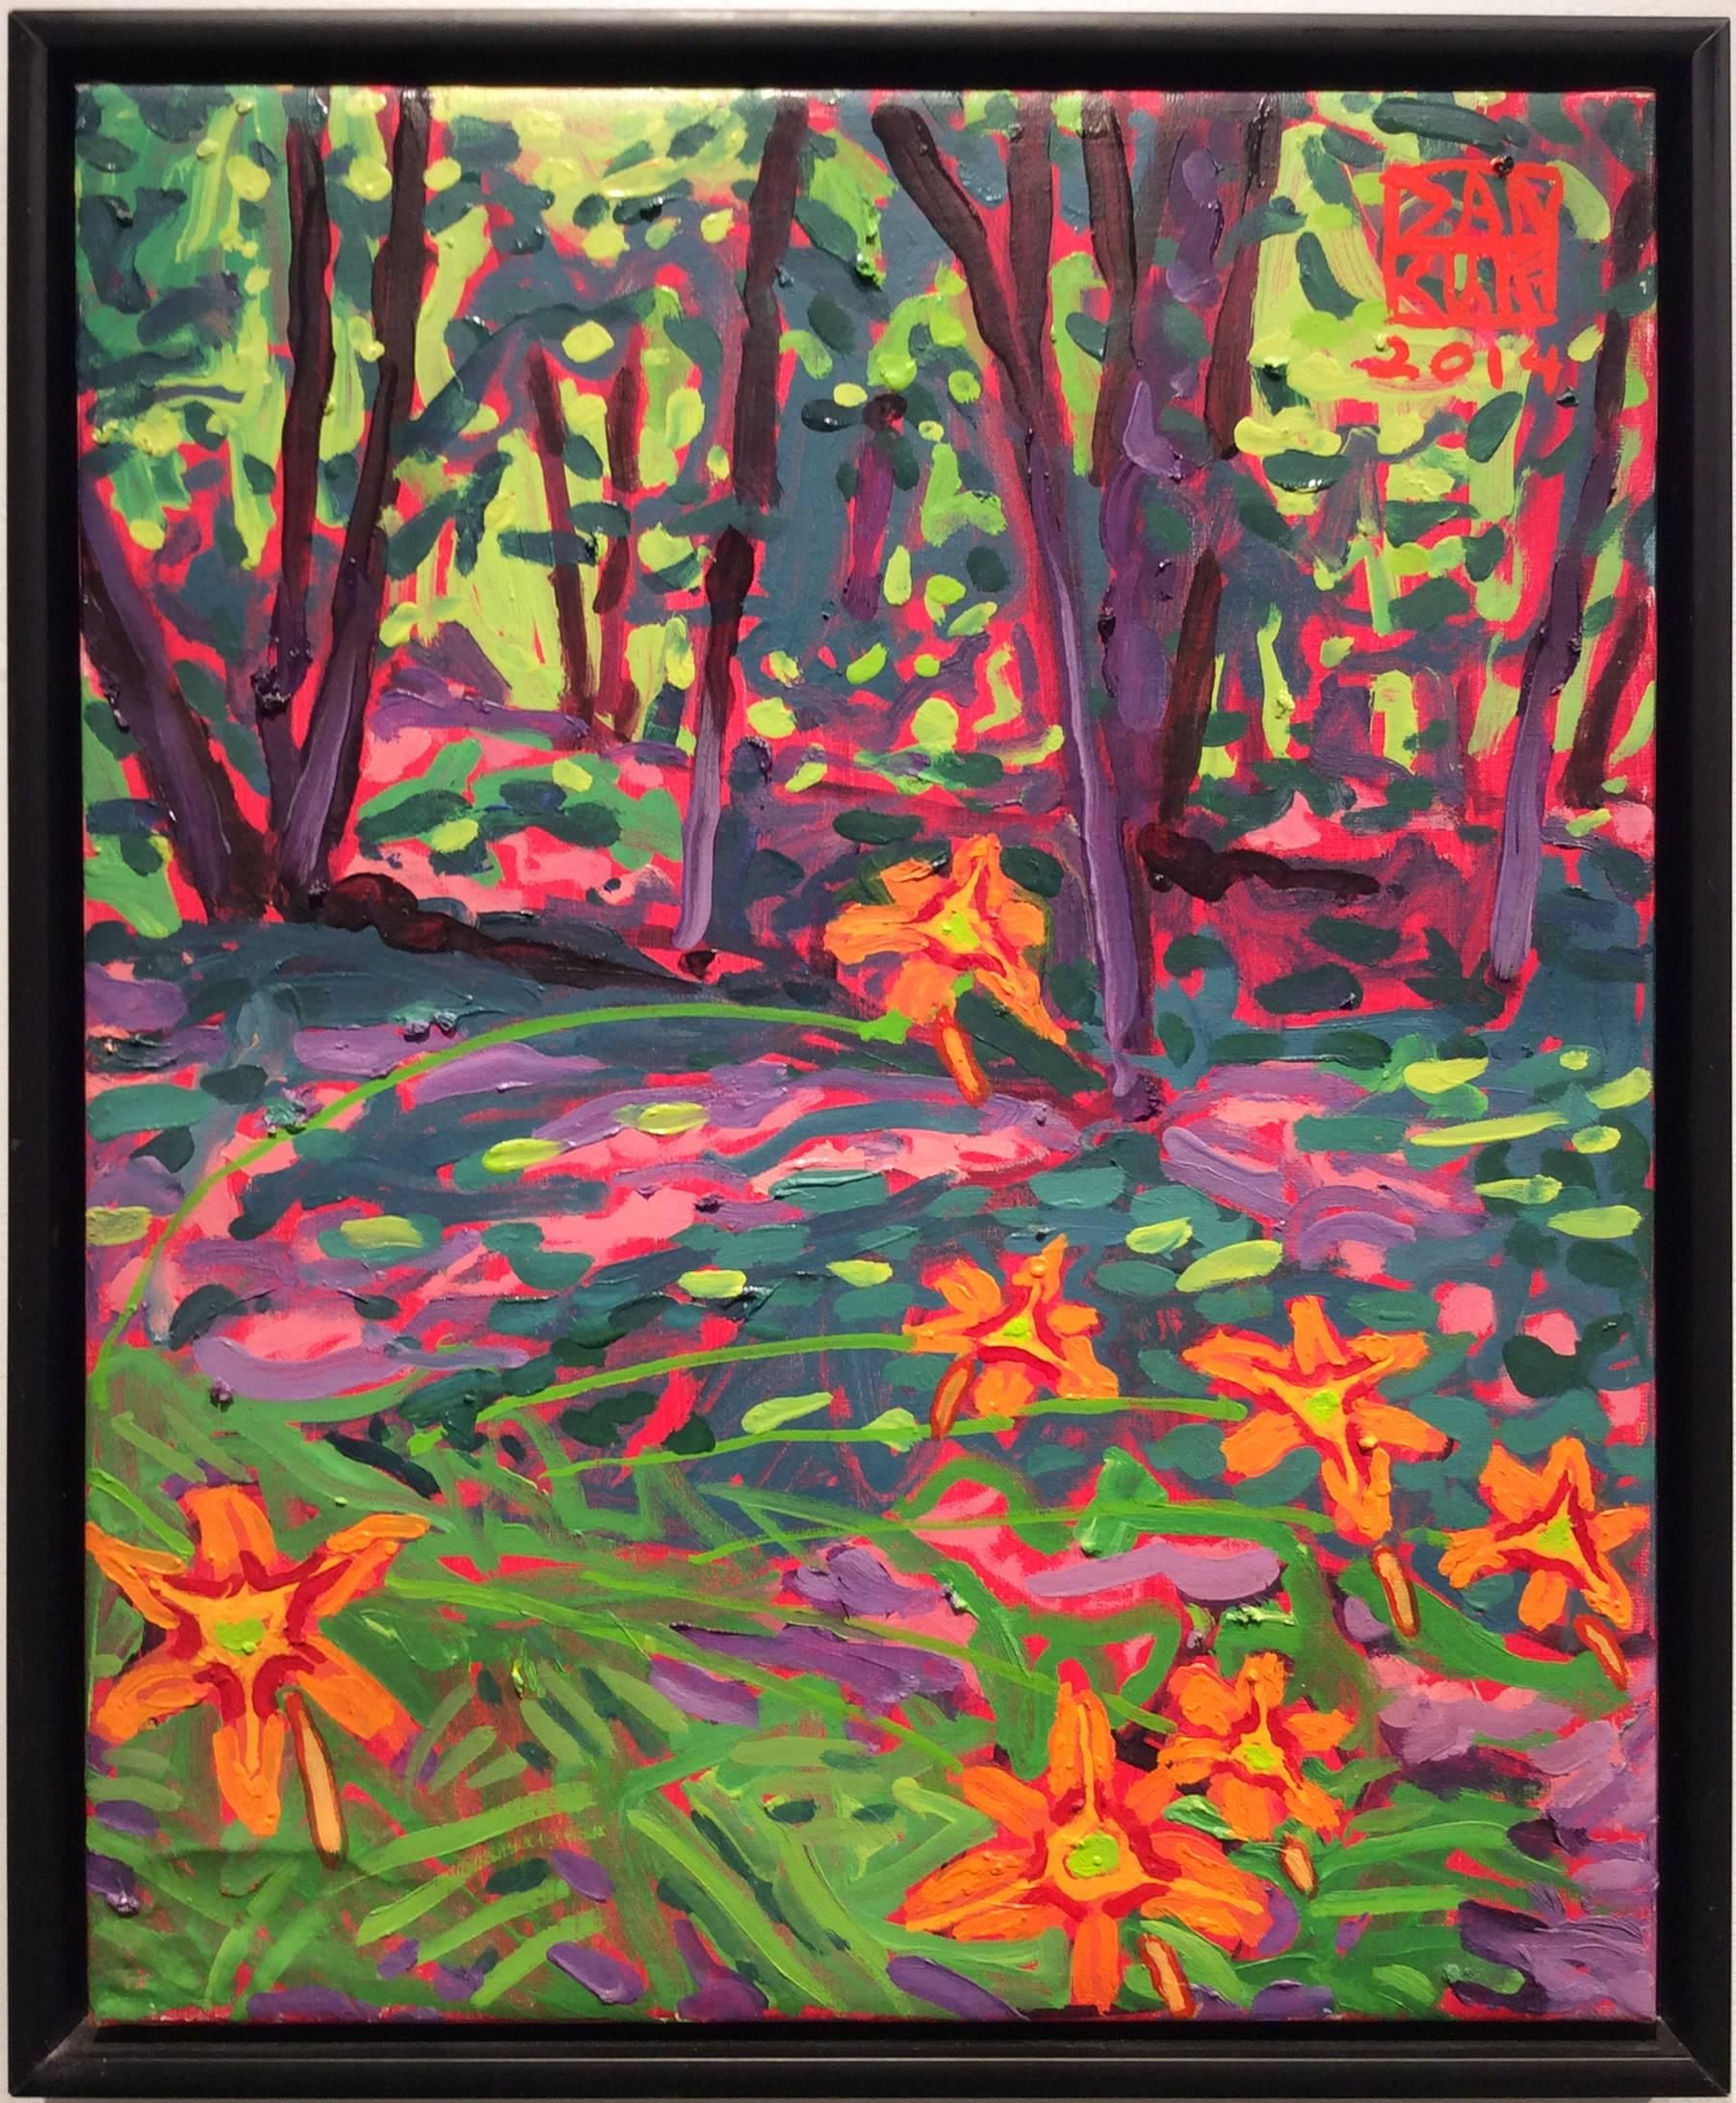 Contemporary abstracted landscape painting of bright orange forest lilies in a wooded forest. 
Oil on canvas in dark wood frame
22 x 18 inches

This vibrant, Fauvist-style vertical landscape painting of tangerine-colored tiger lily flowers against a